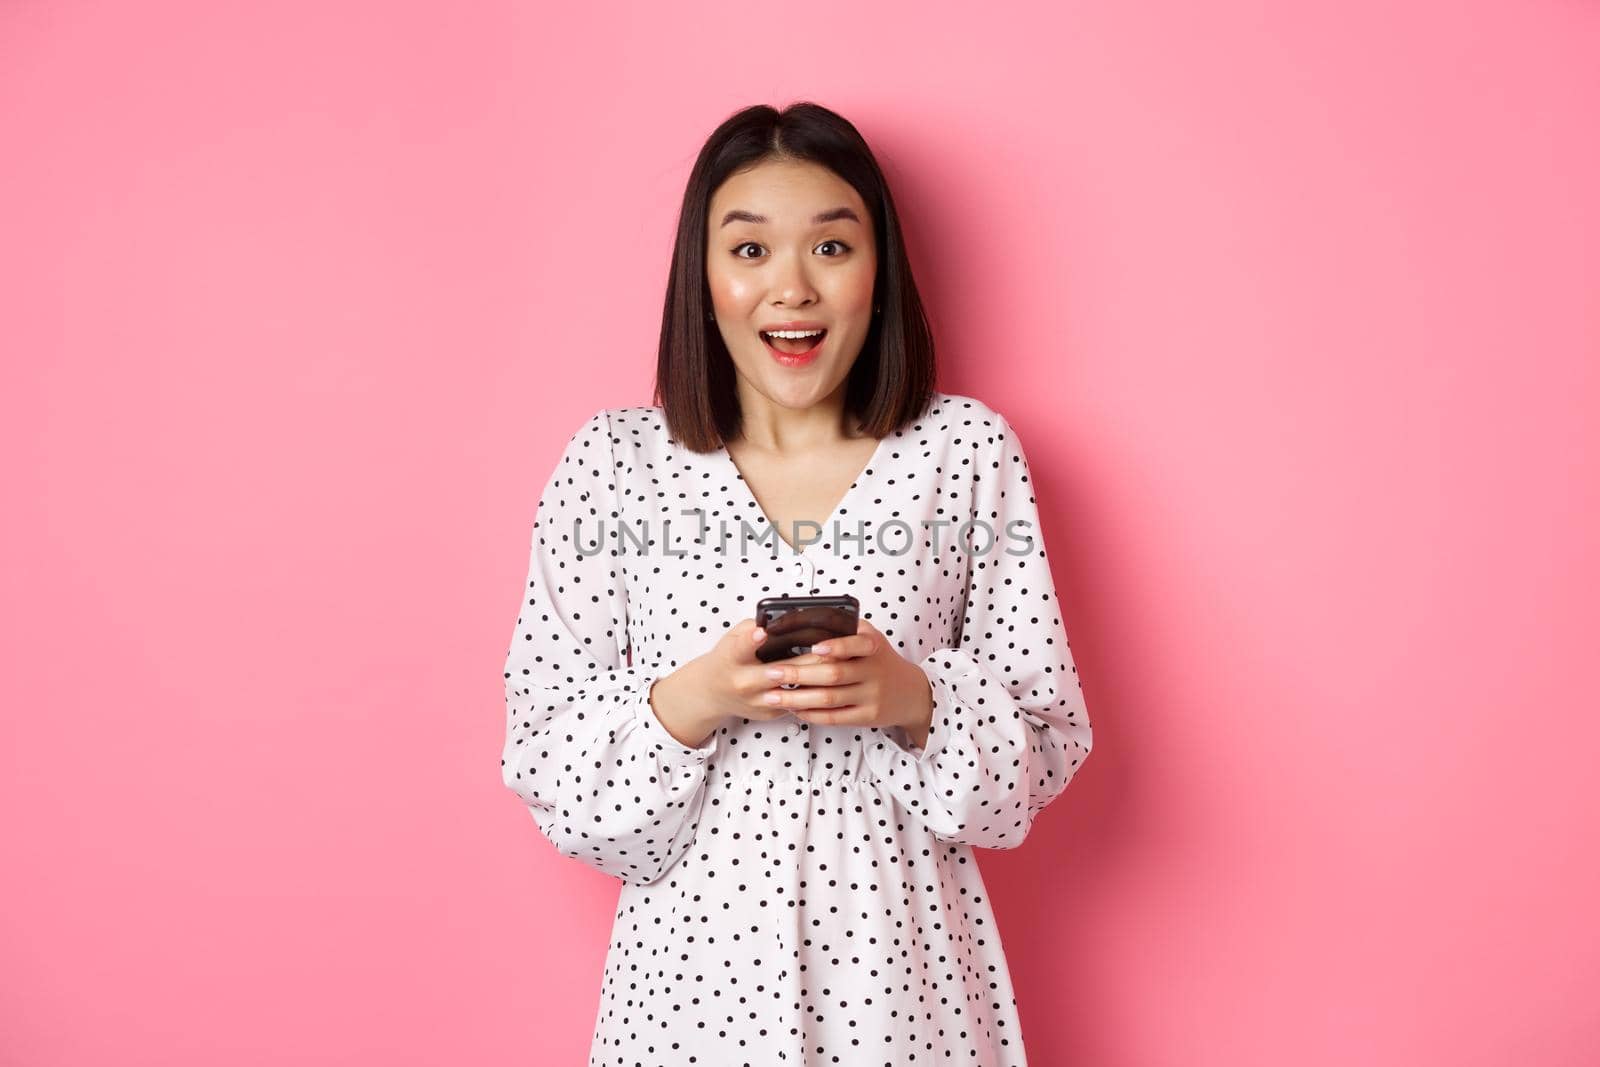 Online shopping. Amazed asian woman looking at camera with happy smile, making purchase with smartphone, using mobile phone app, standing over pink background.